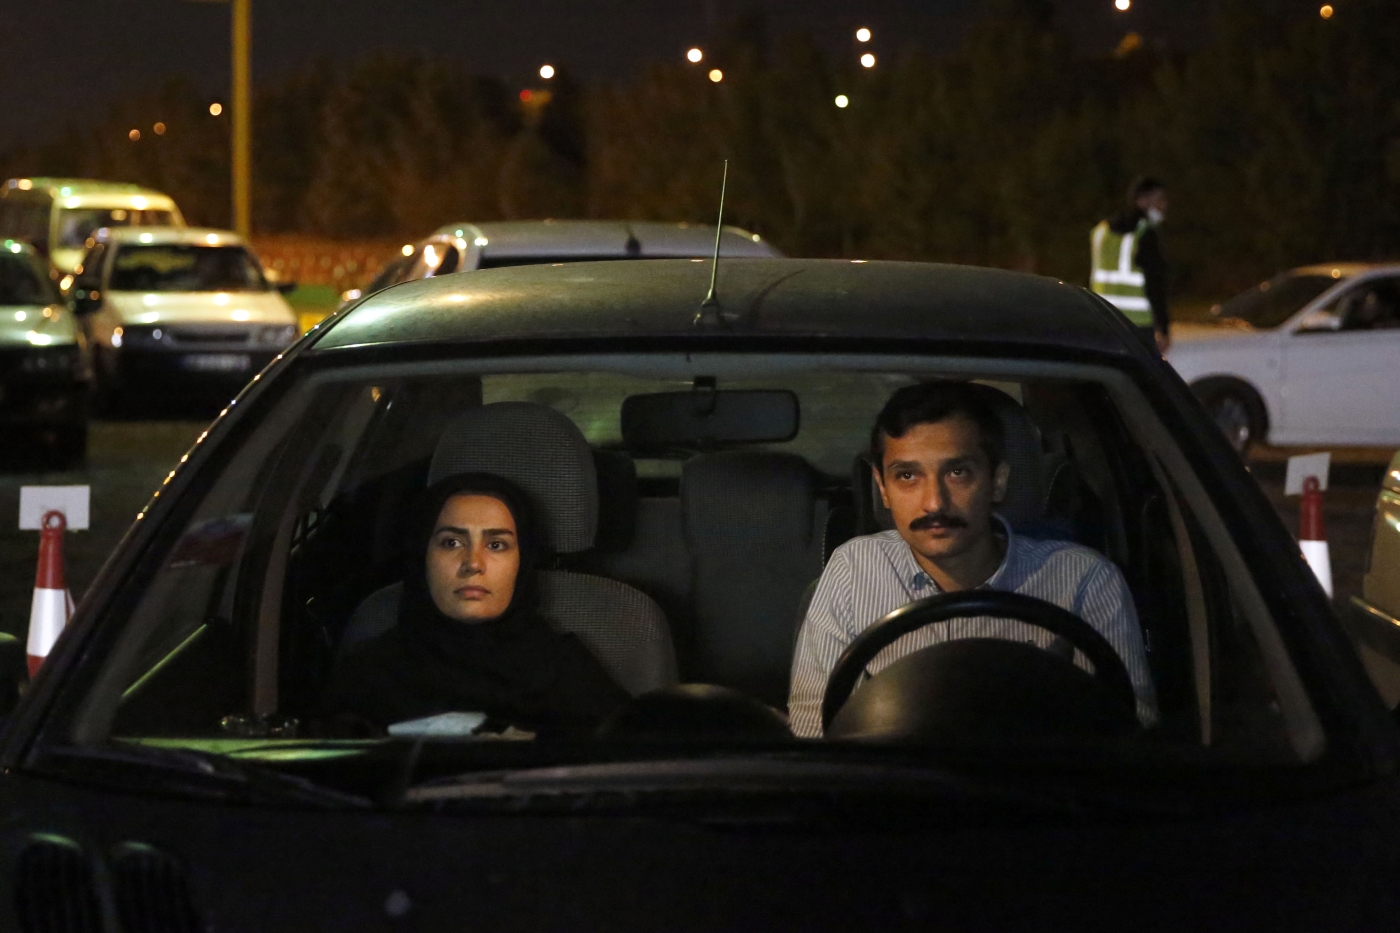 Iranians sitting in their vehicles attend a drive-in religious ceremony